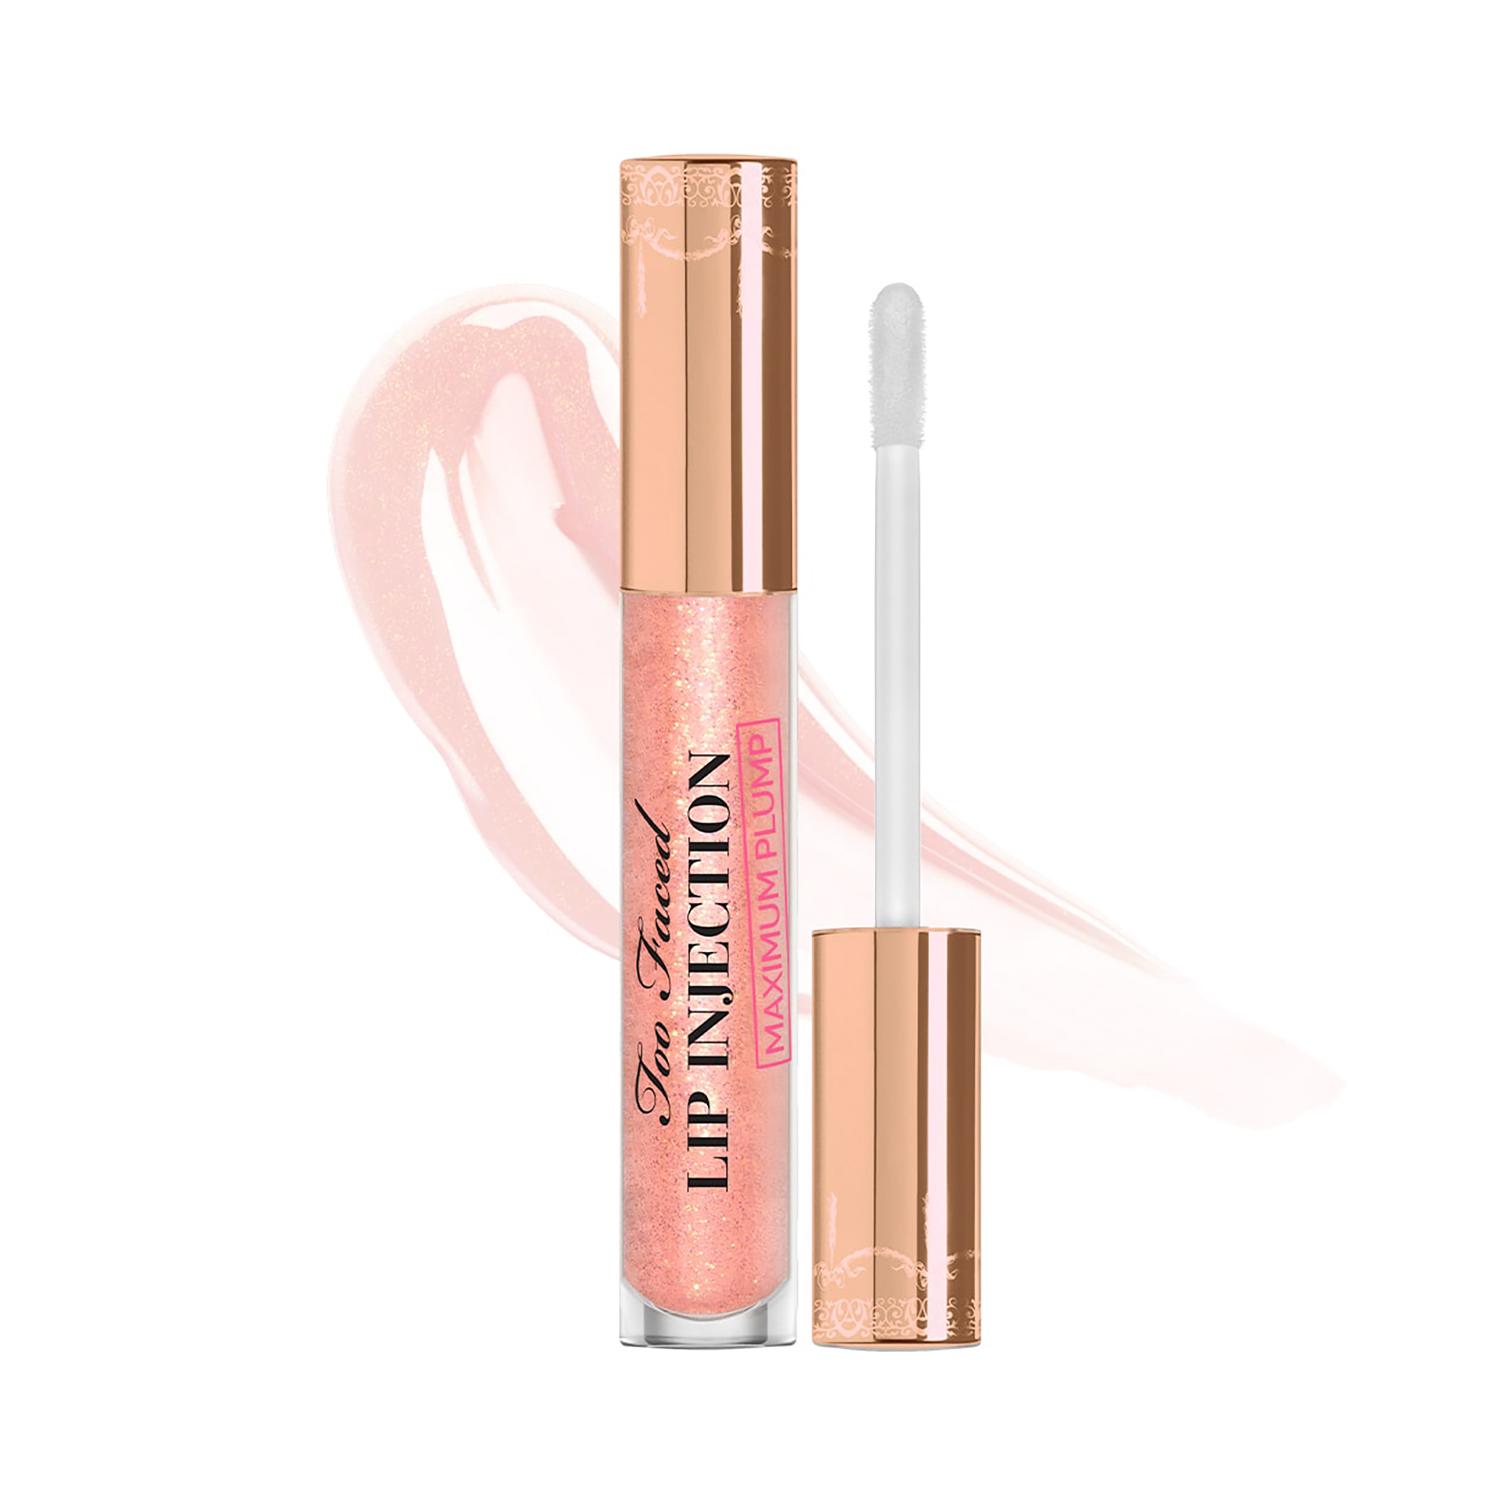 Too Faced | Too Faced Lip Injection Maximum Plump Lip Plumper - Cotton Candy Kisses (4g)